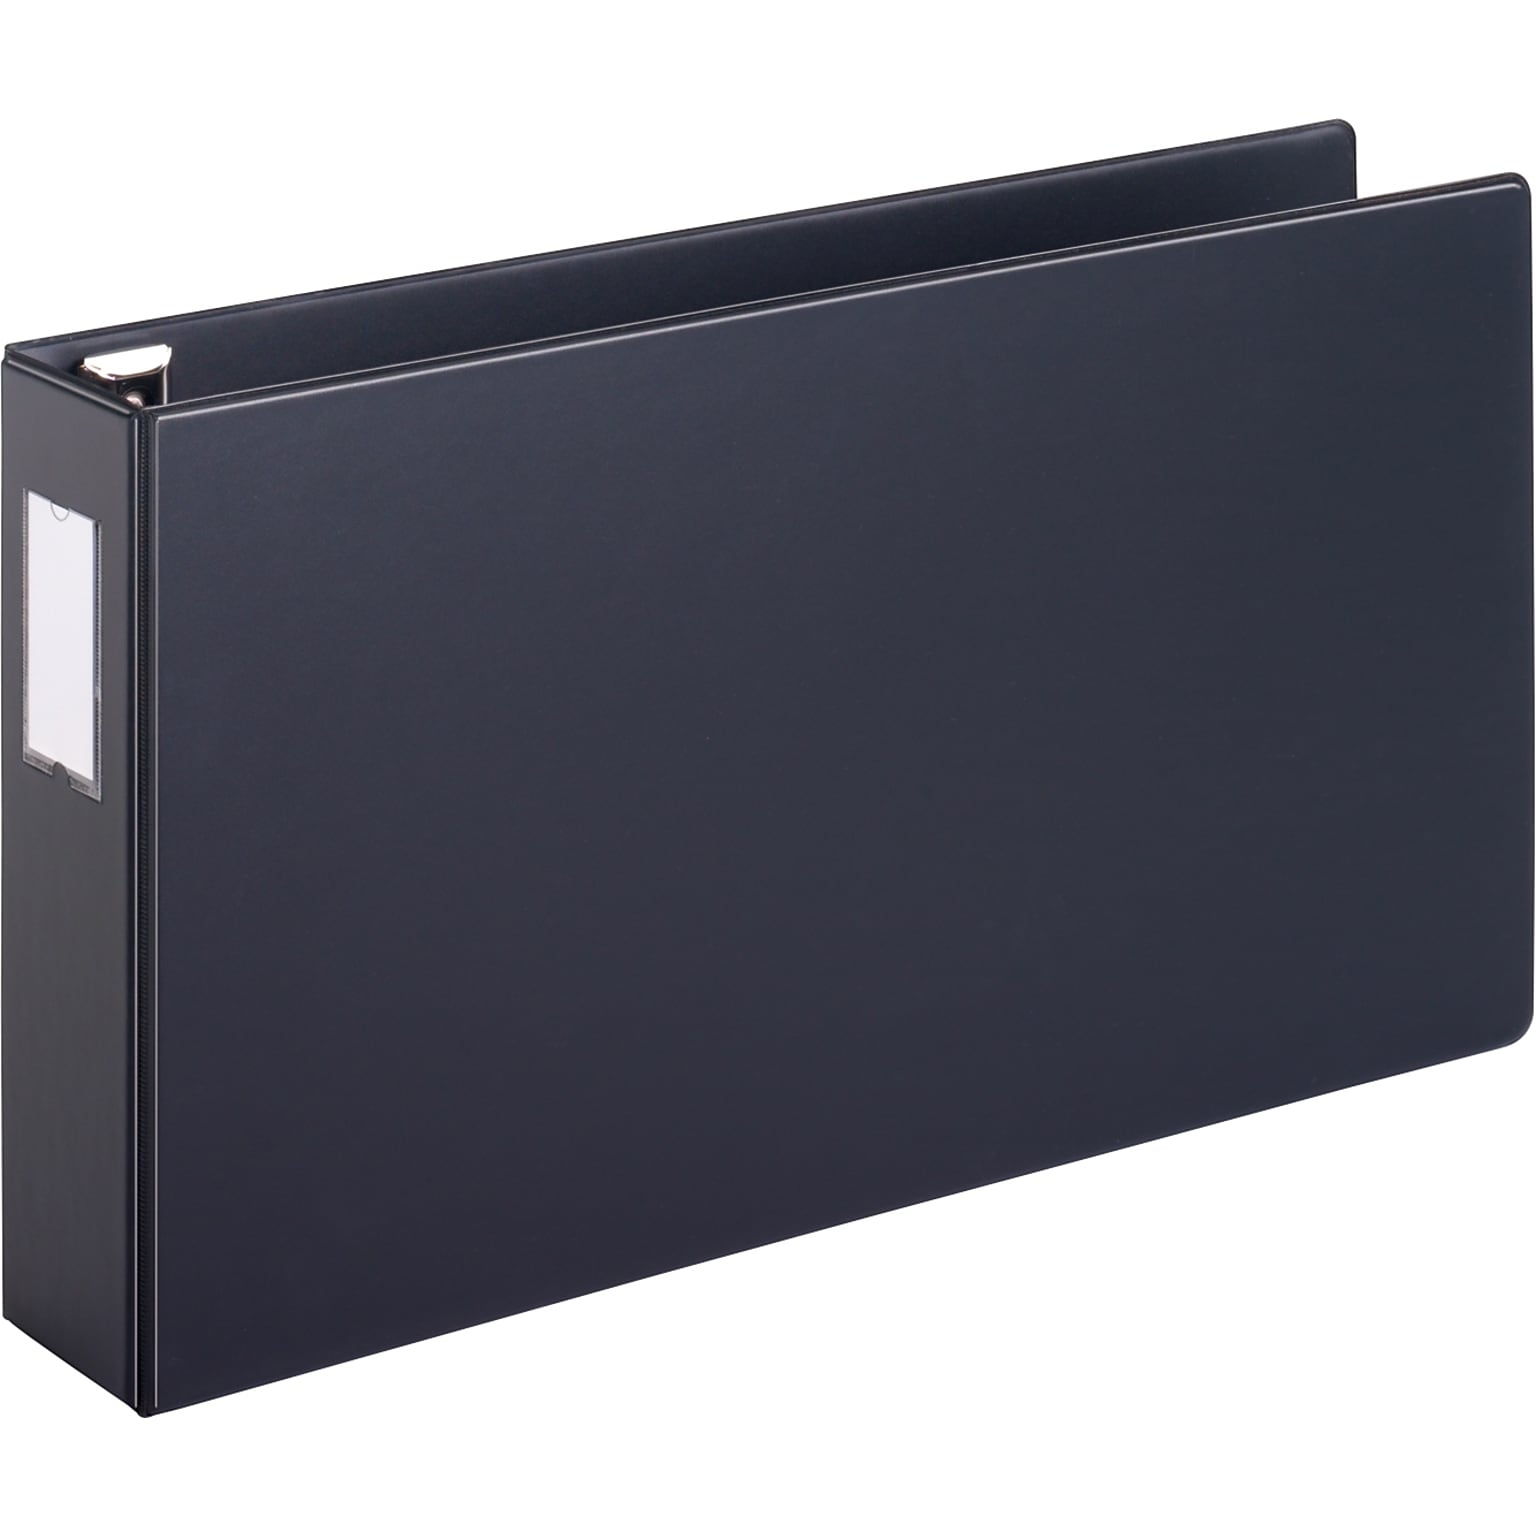 Cardinal EasyOpen Tabloid Slant-D Reference Heavy Duty 3 3-Ring Non-View Binders, D-Ring, Black (12142V3)